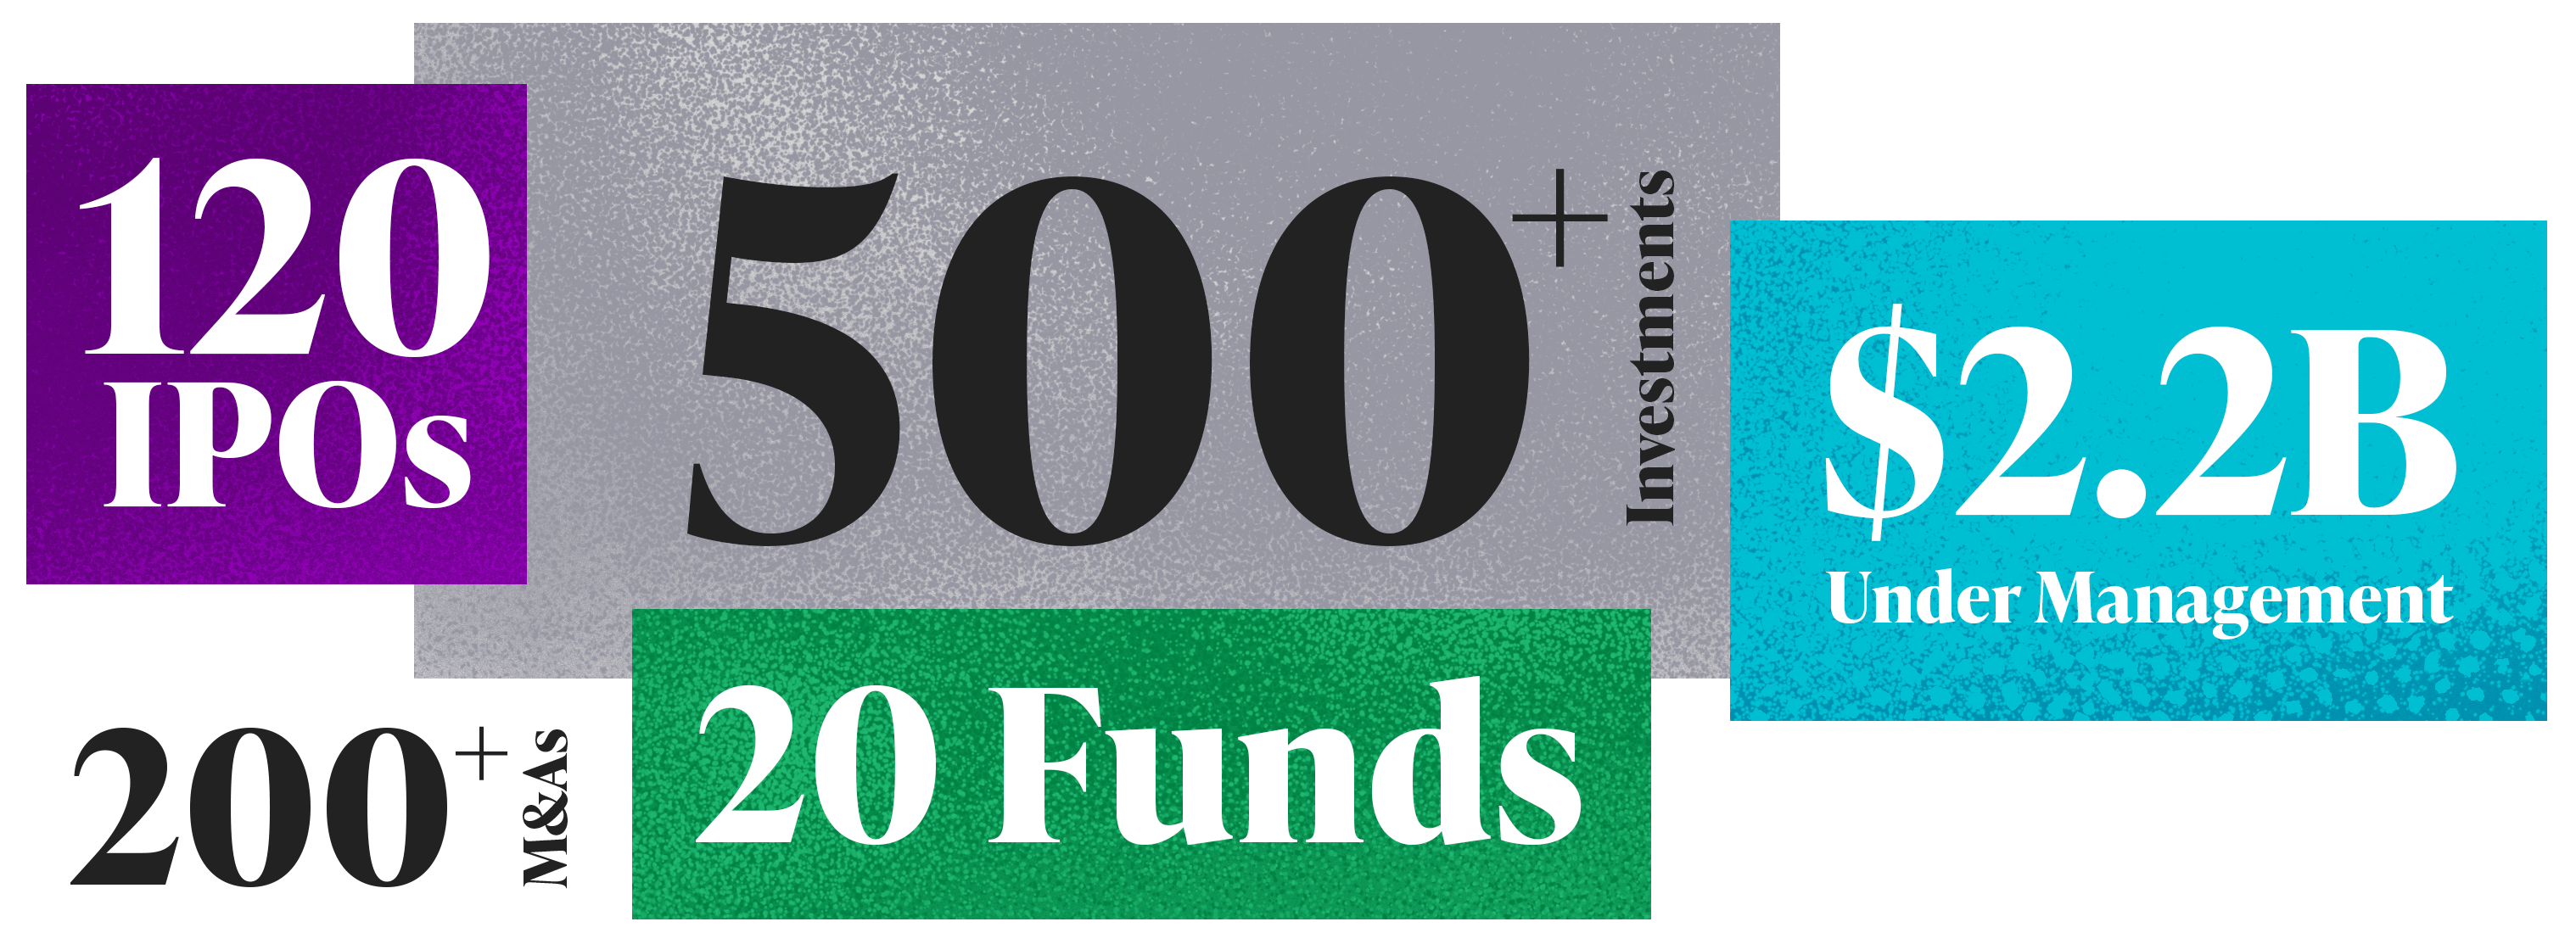 119 IPOs, 500+ investments, $2.5B under management, 200+ M&As, 20 Funds